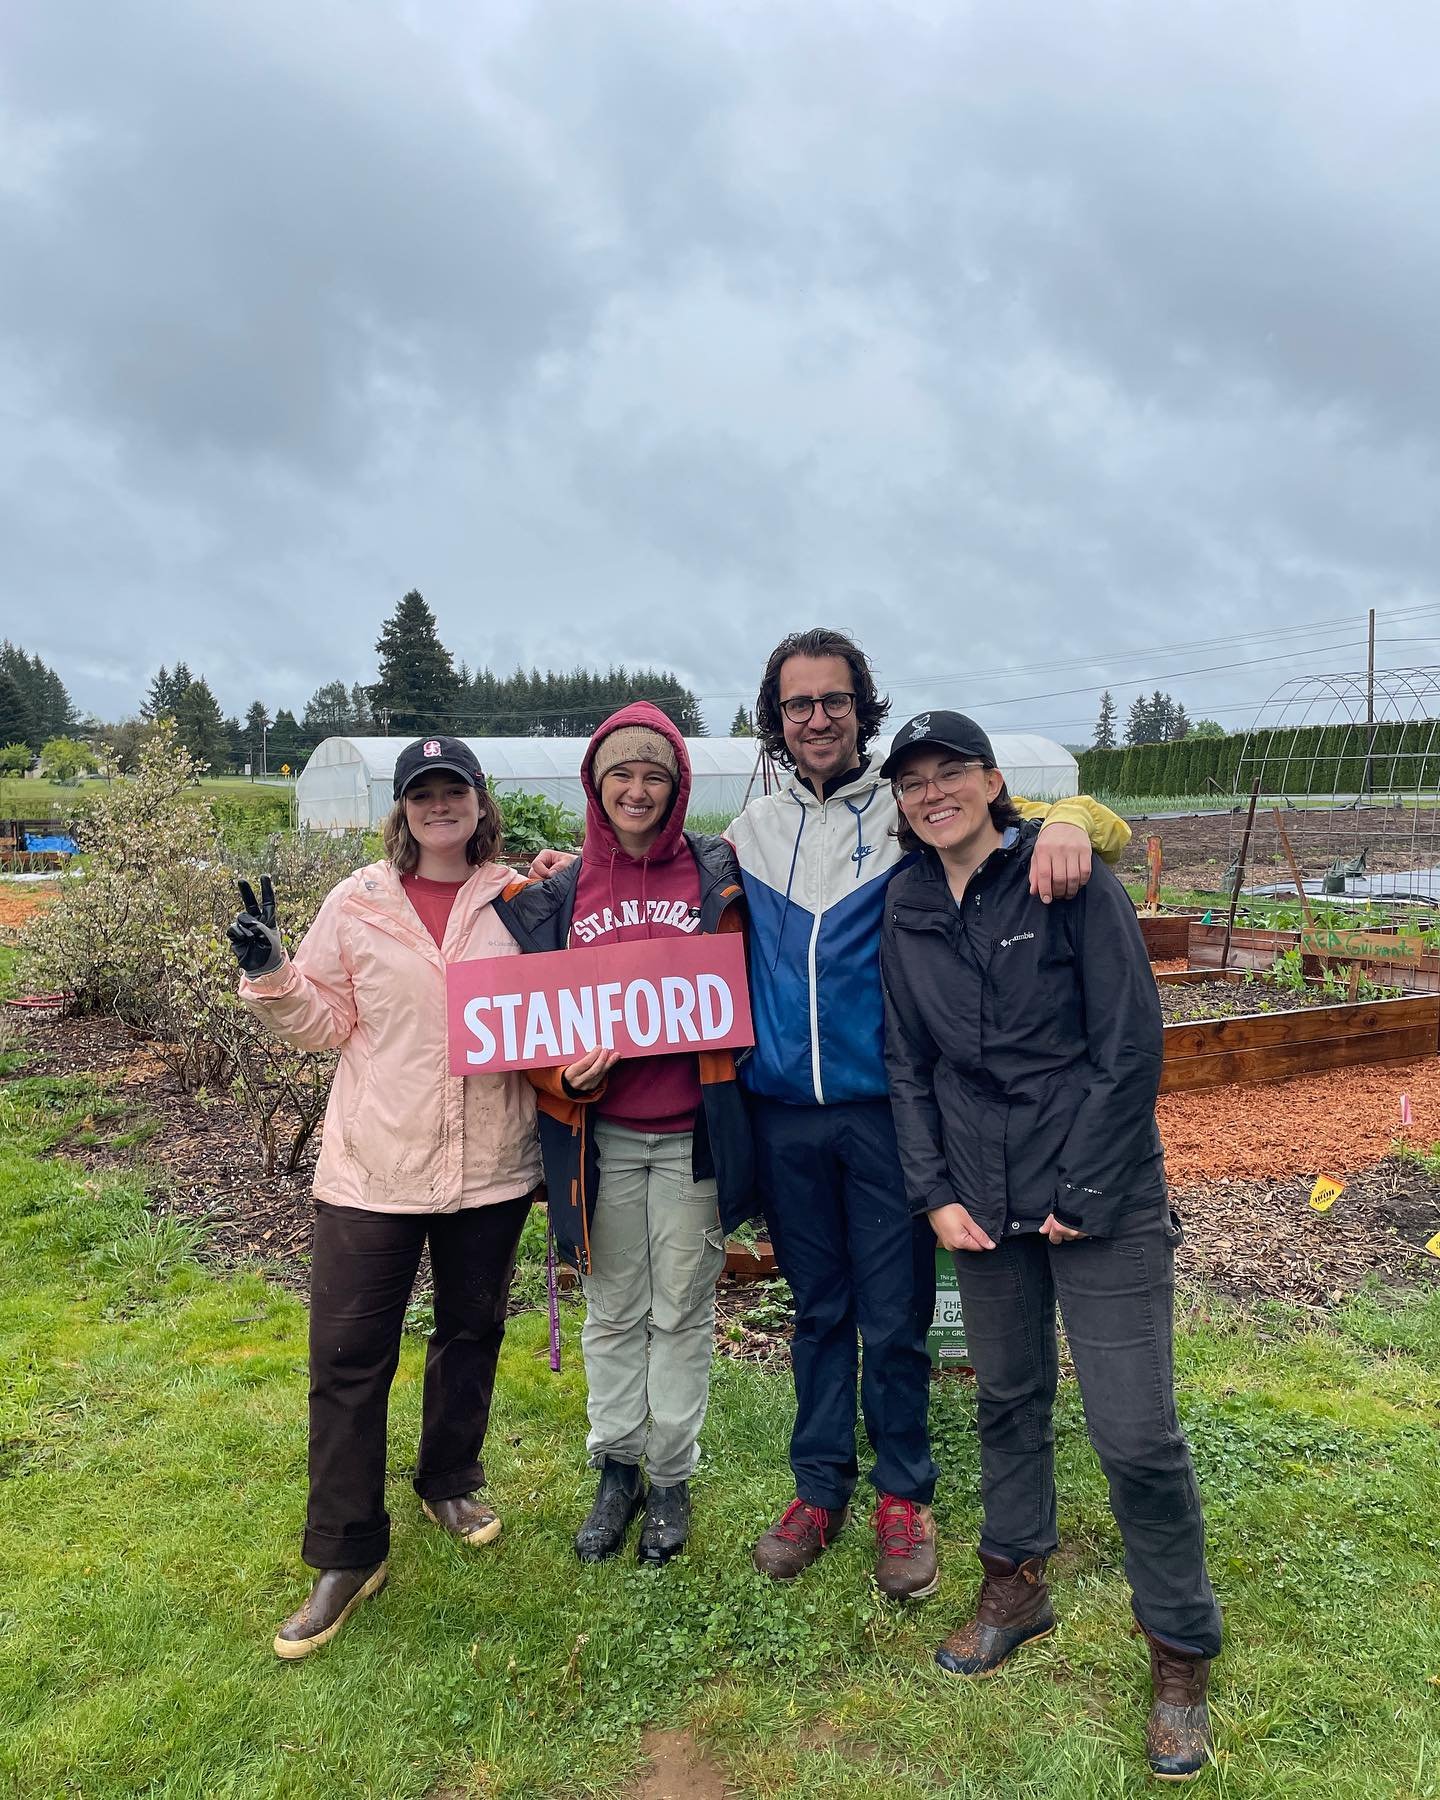 We had a great Community Farm Day and Stanford Beyond the Farm Day on Saturday despite the rain! Our dedicated Stanford friends shoveled, wheelbarrowed, and spread wood chips in our learning garden. Plus some old and new friends stopped by the farm t